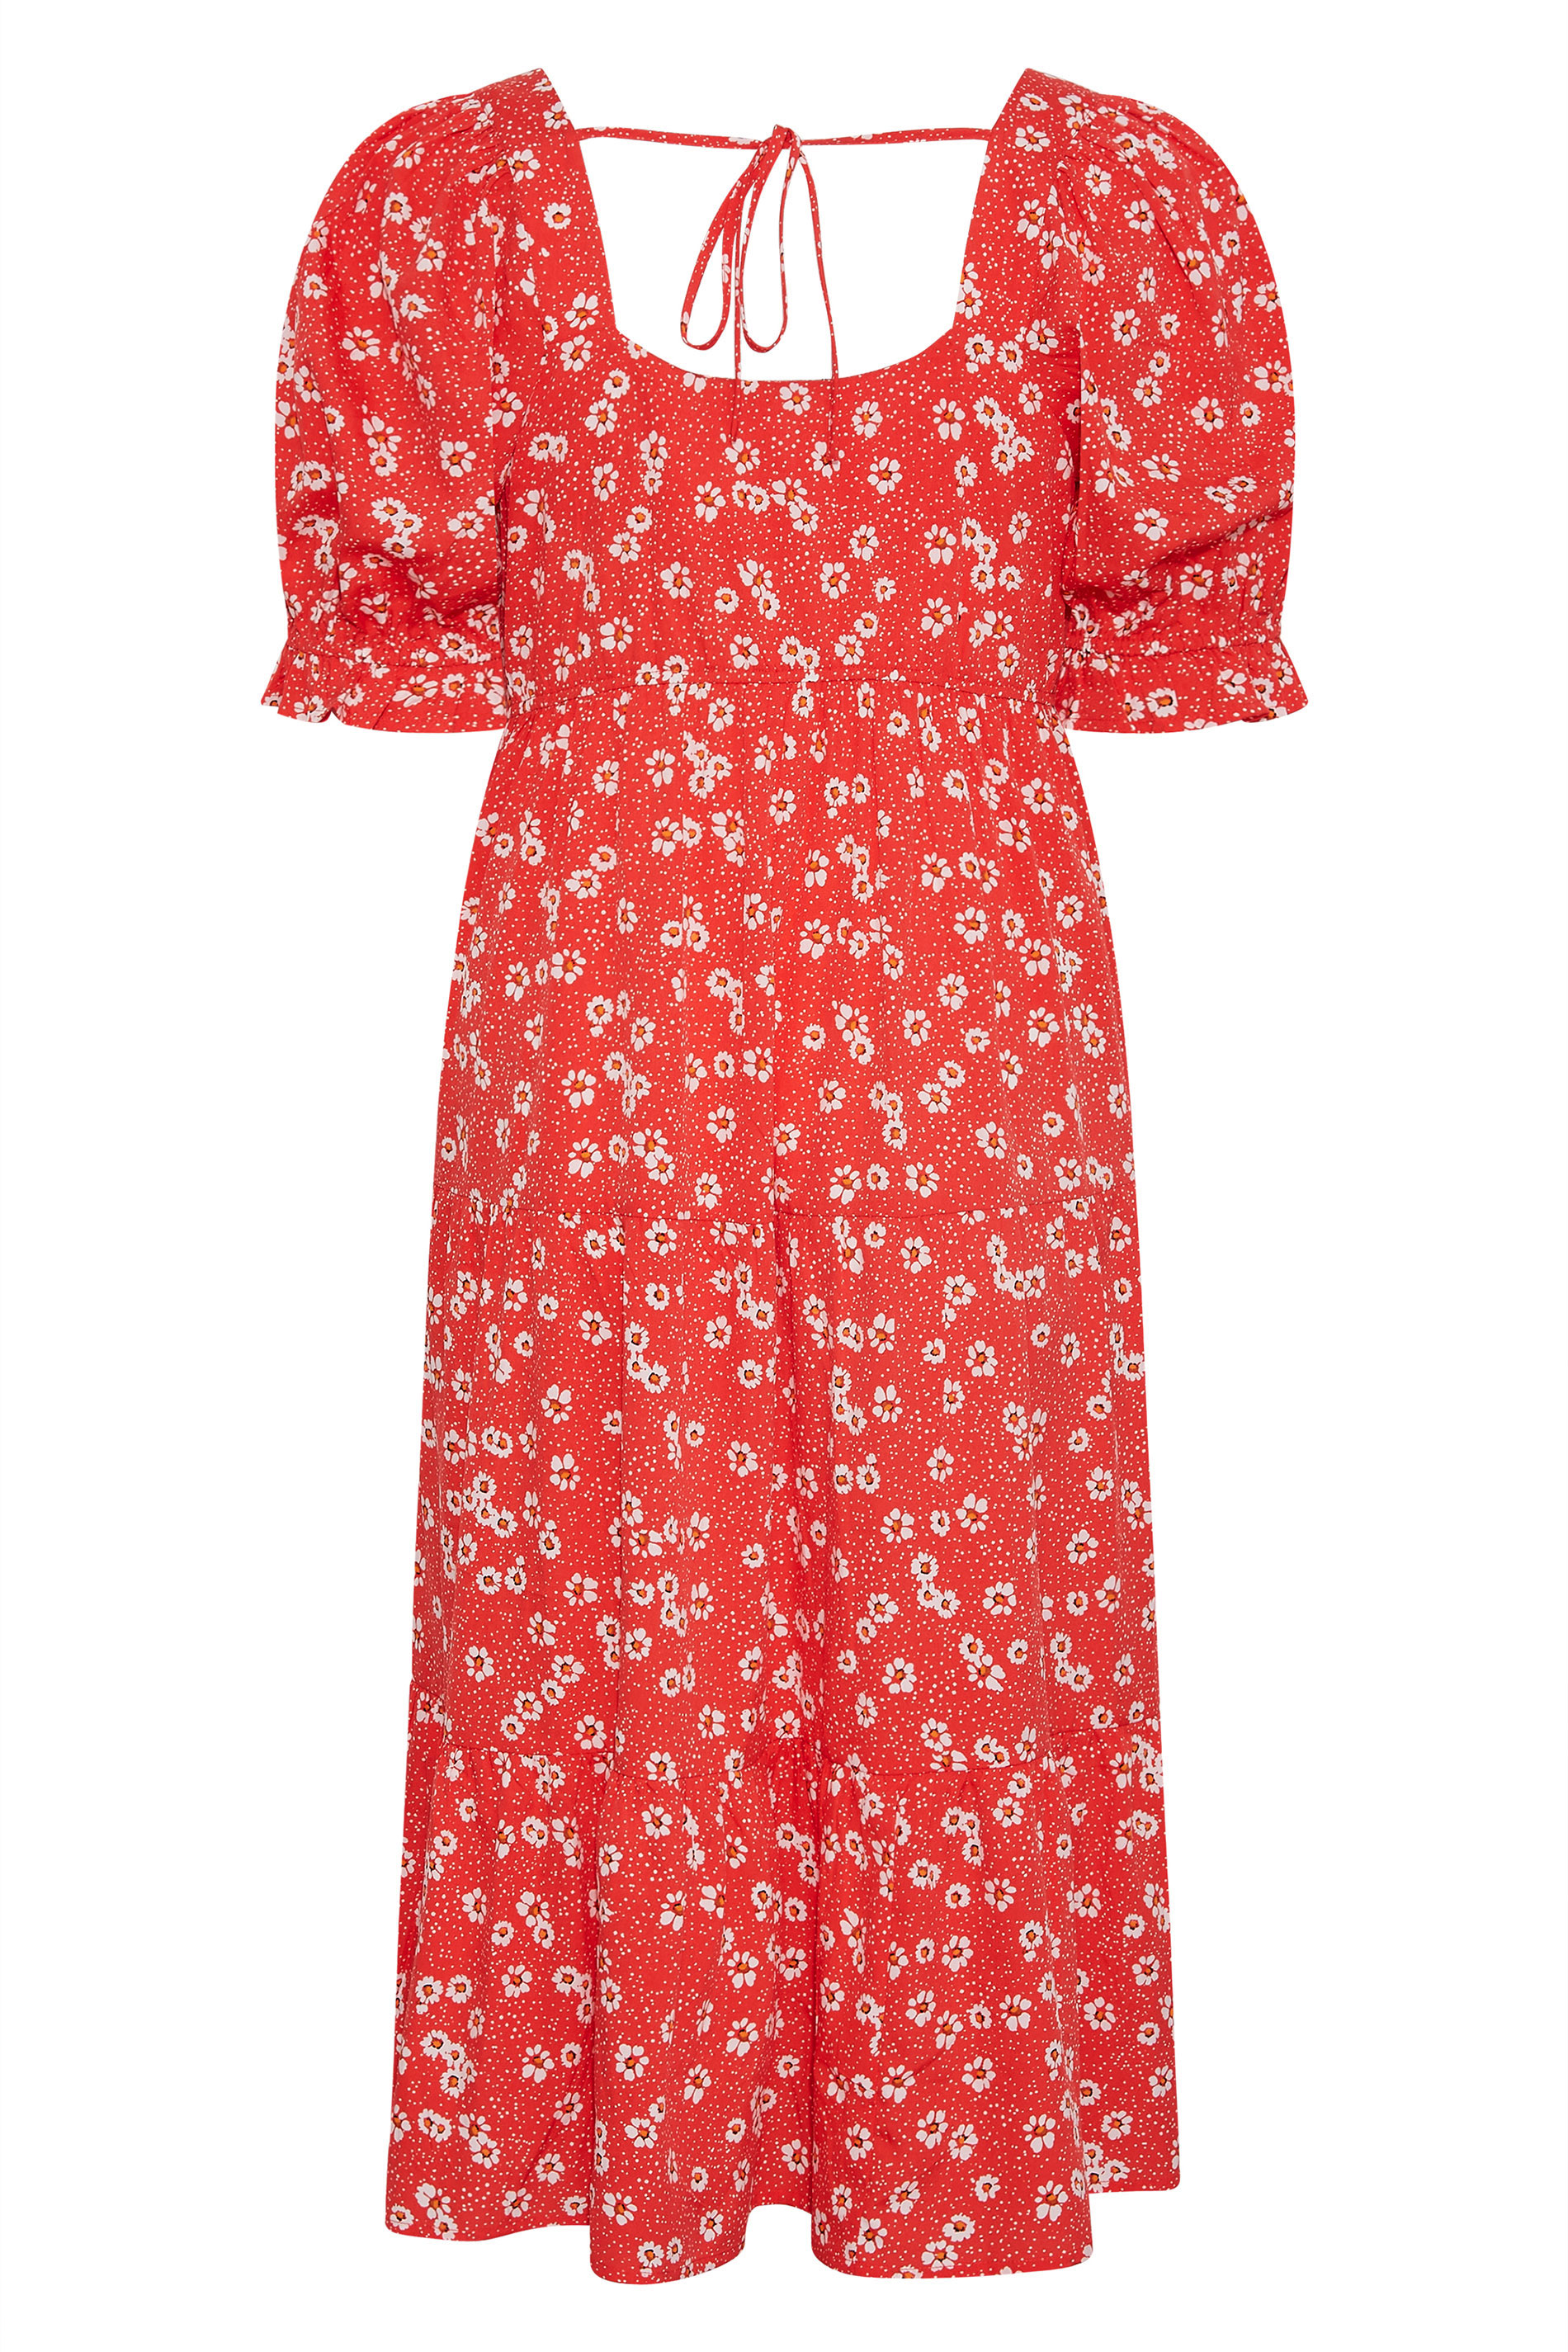 Robes Grande Taille Grande taille  Robes dÉté | LIMITED COLLECTION - Robe Rouge Floral Manches Courtes Bouffantes - UX39424